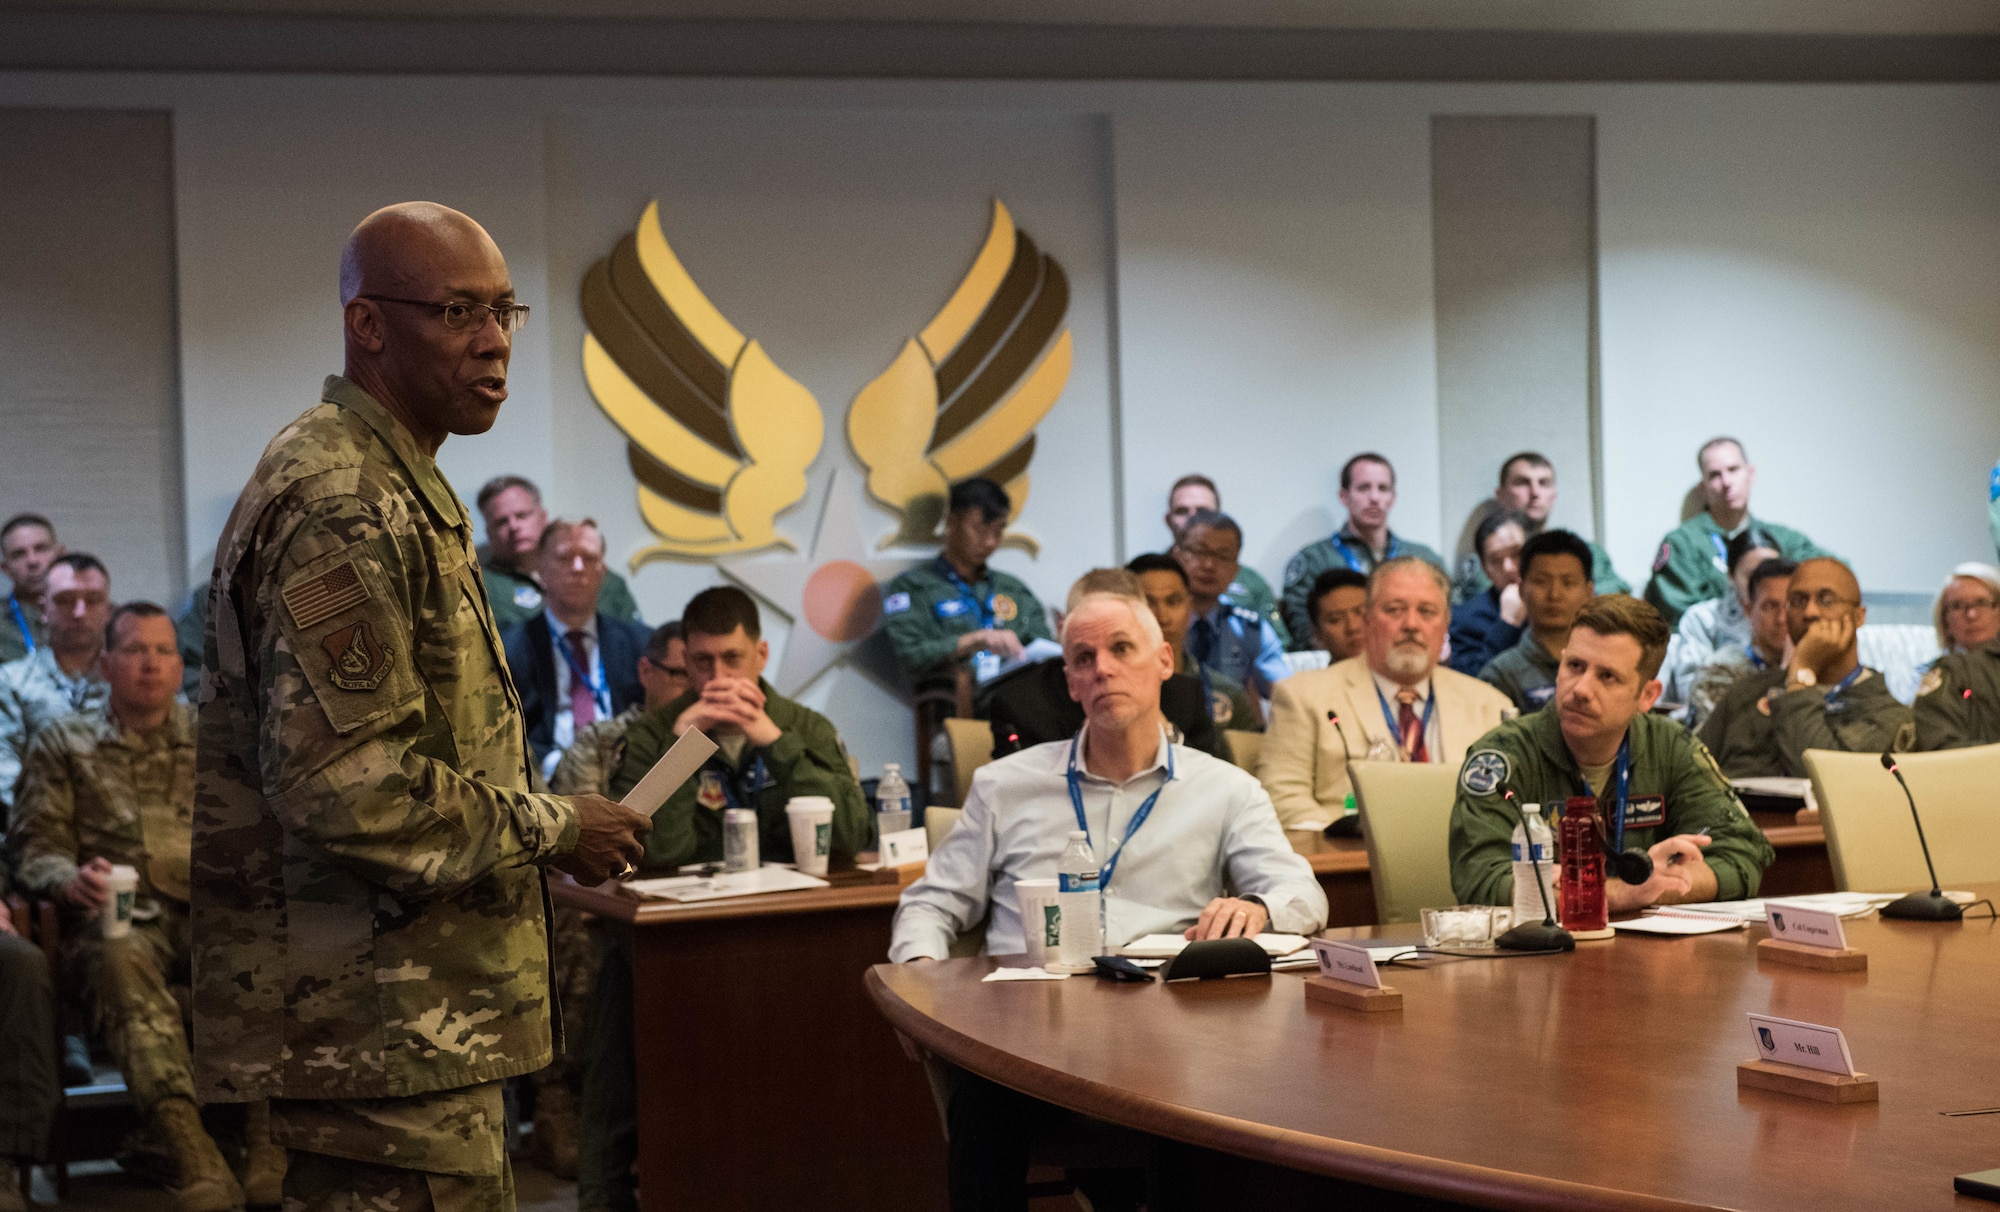 U.S. Air Force Gen. CQ Brown, Jr., Pacific Air Forces (PACAF) commander, speaks to members of the Pacific F-35 Users Group Conference at Headquarters PACAF, Joint Base Pearl Harbor-Hickam, Hawaii, March 12, 2019.